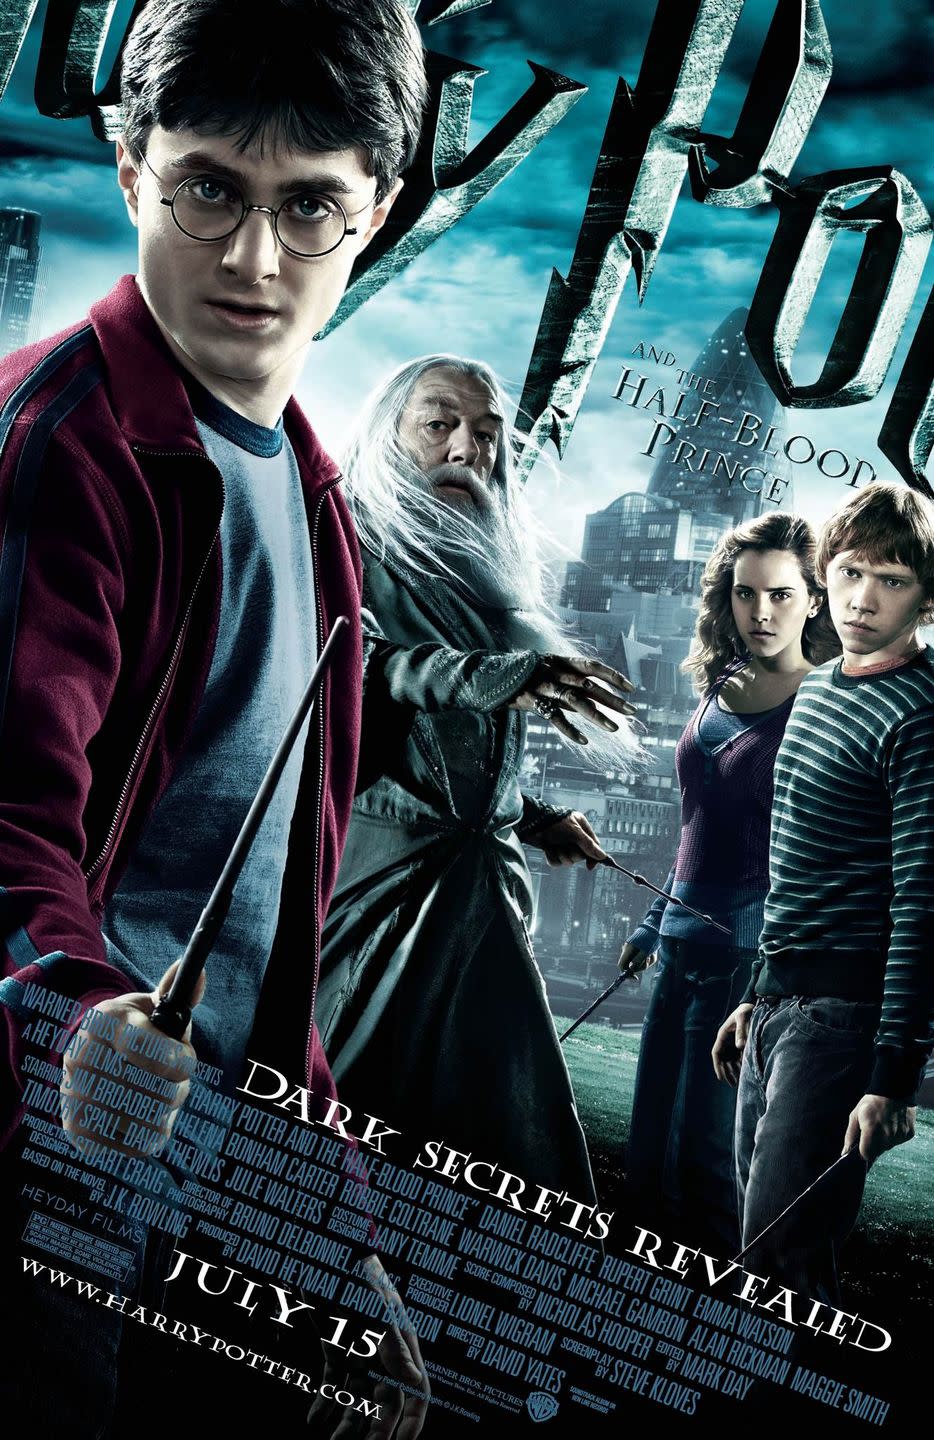 8) Harry Potter and the Half Blood Prince